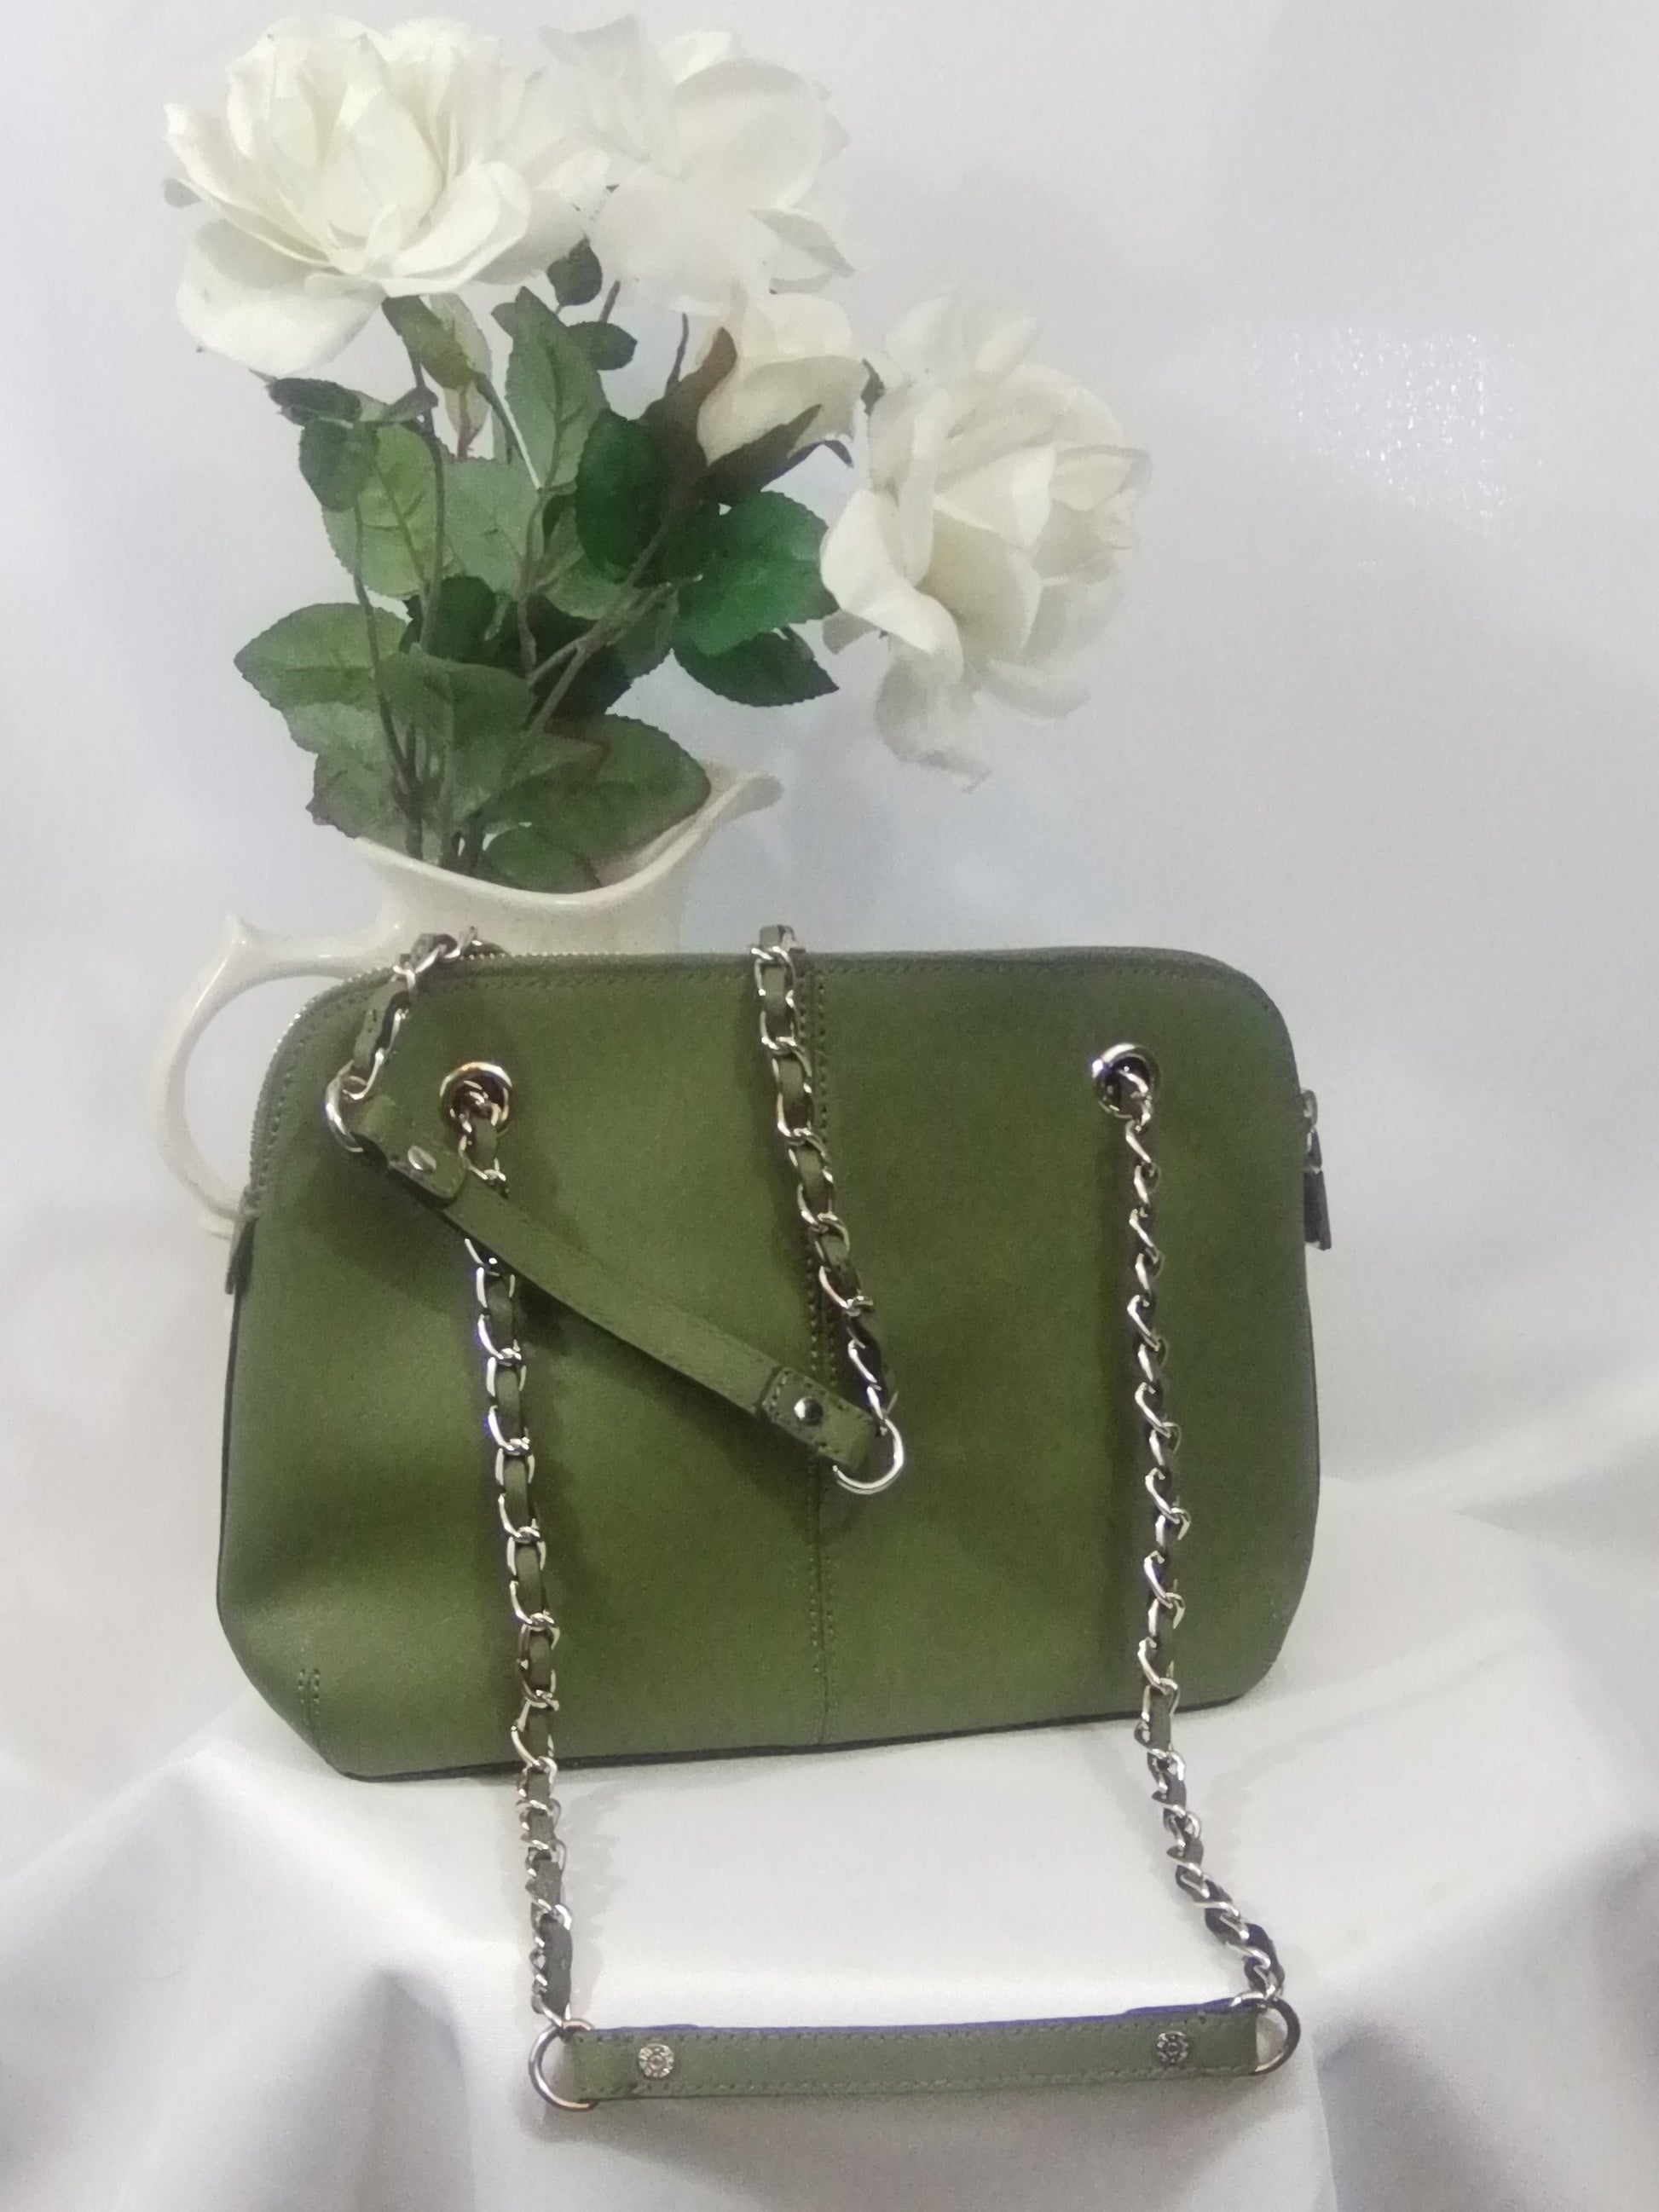 DKNY Olive Green Dome Leather Crossbody Bag with Gold Chain Strap –  PhoenixLuxe